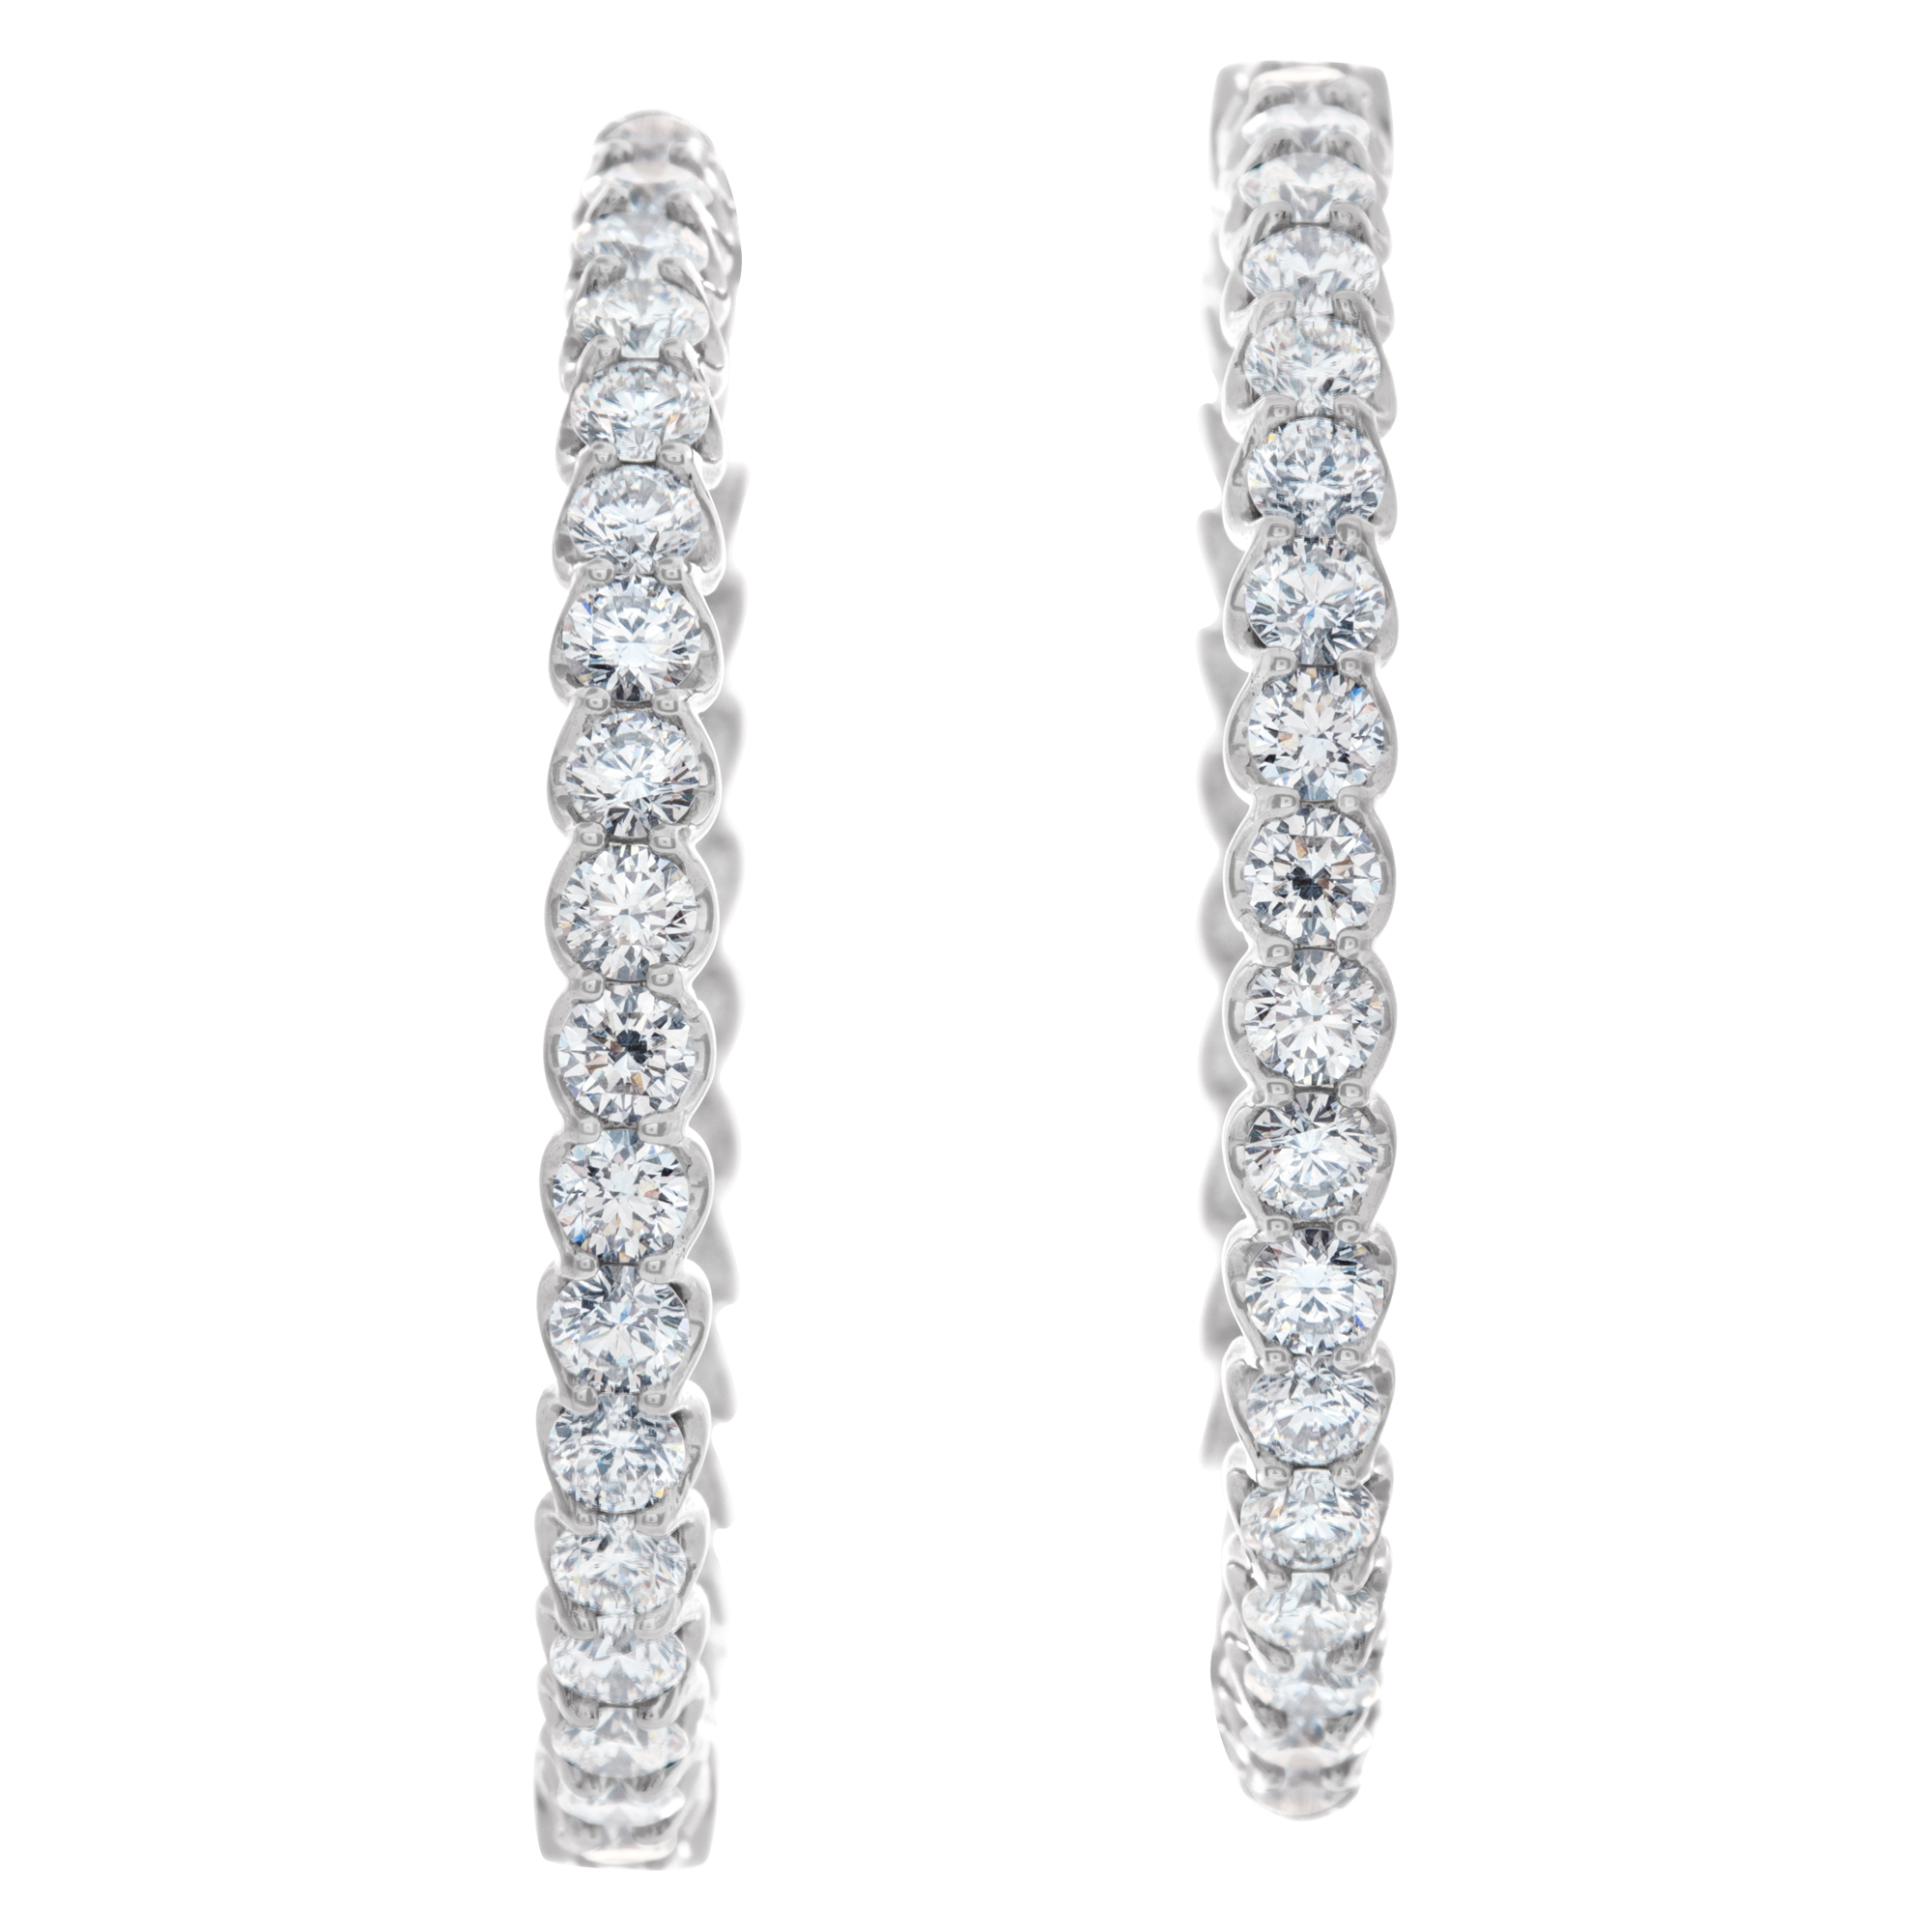 Inside-out diamonds hoop earringsset in 14k white gold. Round brilliant cut diamonds total approx. wweight: 3.90 carats